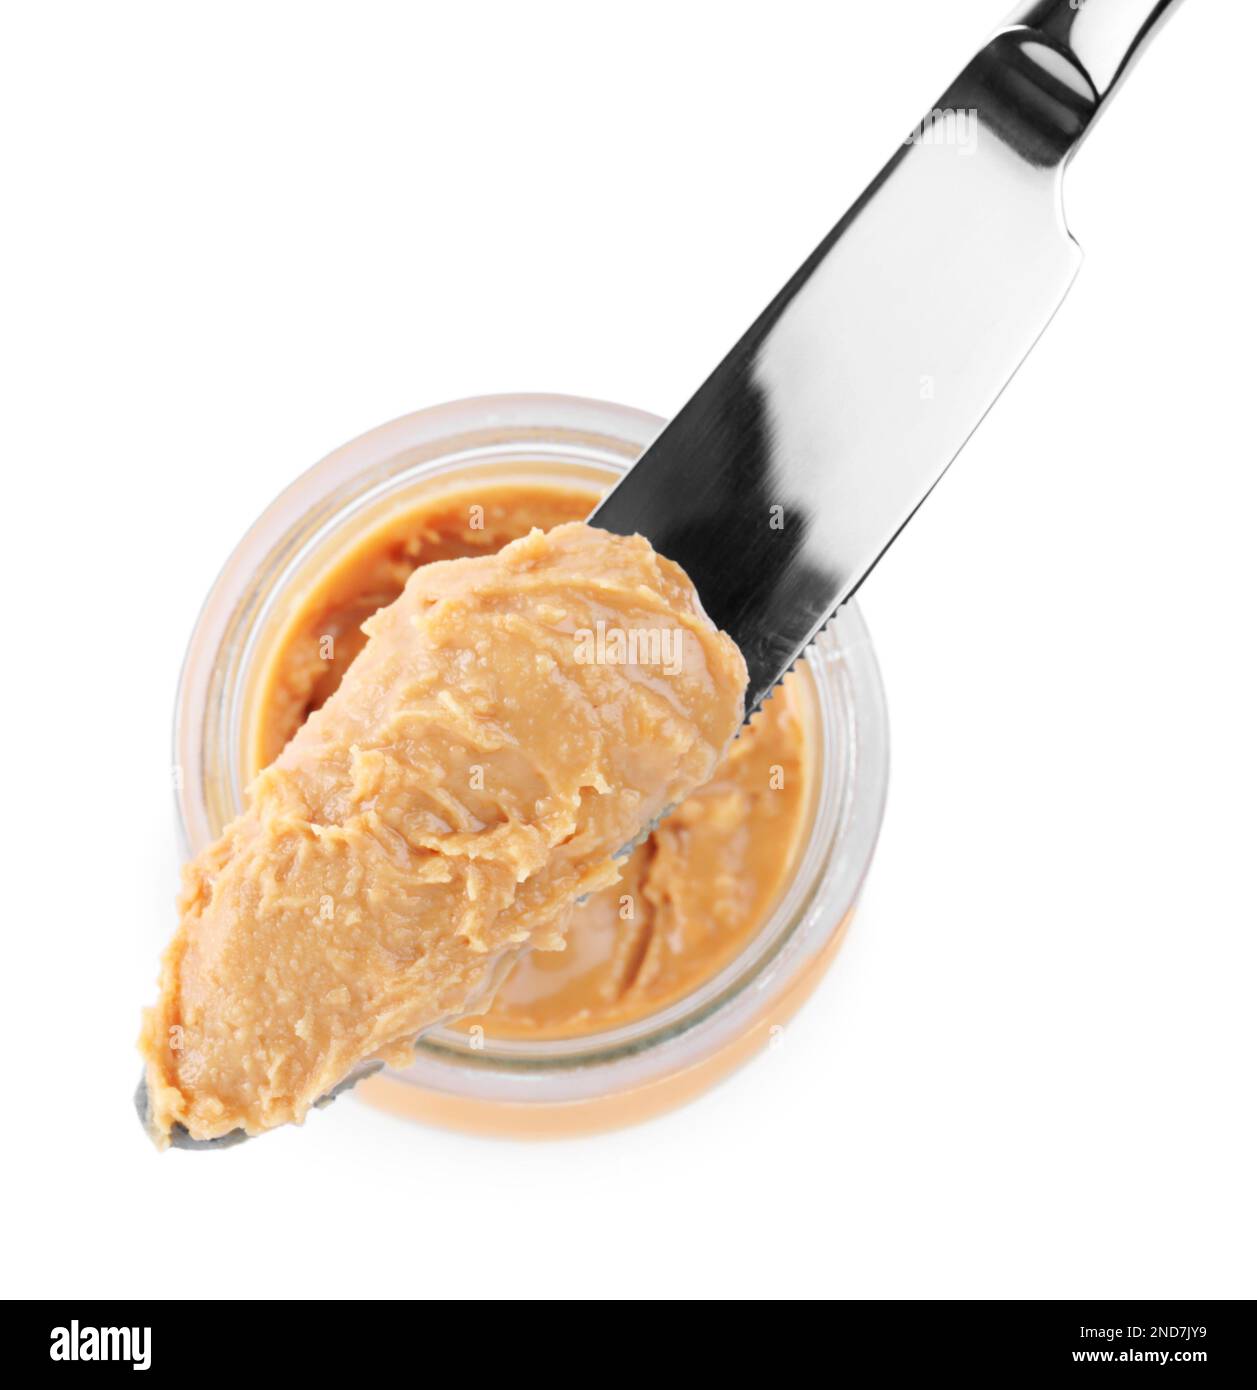 https://c8.alamy.com/comp/2ND7JY9/glass-jar-and-knife-with-tasty-peanut-butter-on-white-background-top-view-2ND7JY9.jpg